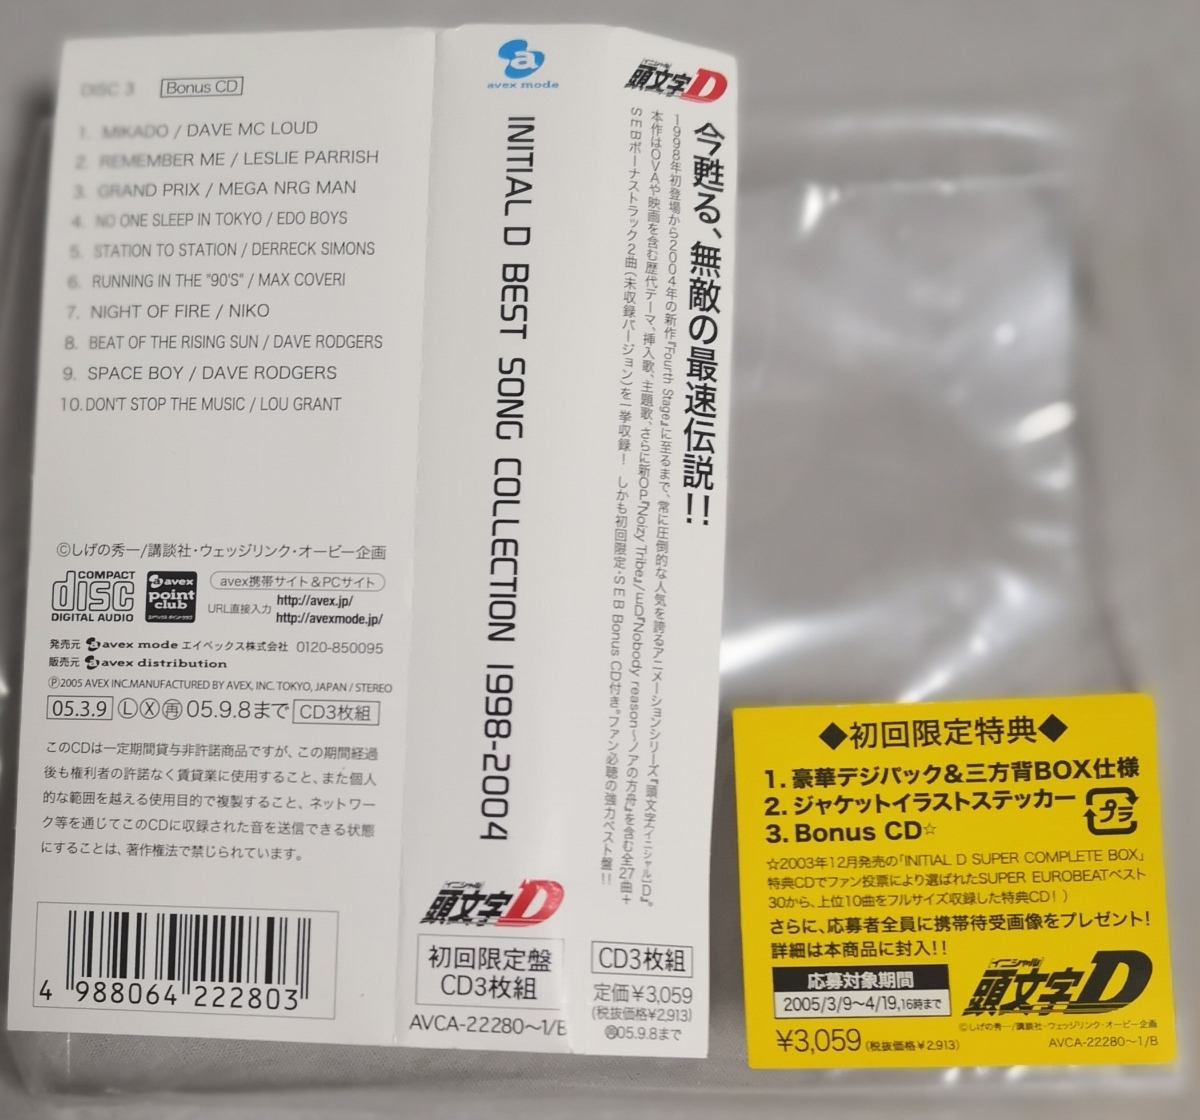 initial D the best song collection 1998-2004]* the first times limitated  production CD3 sheets set set * secondhand goods *100 jpy start selling out  *: Real Yahoo auction salling